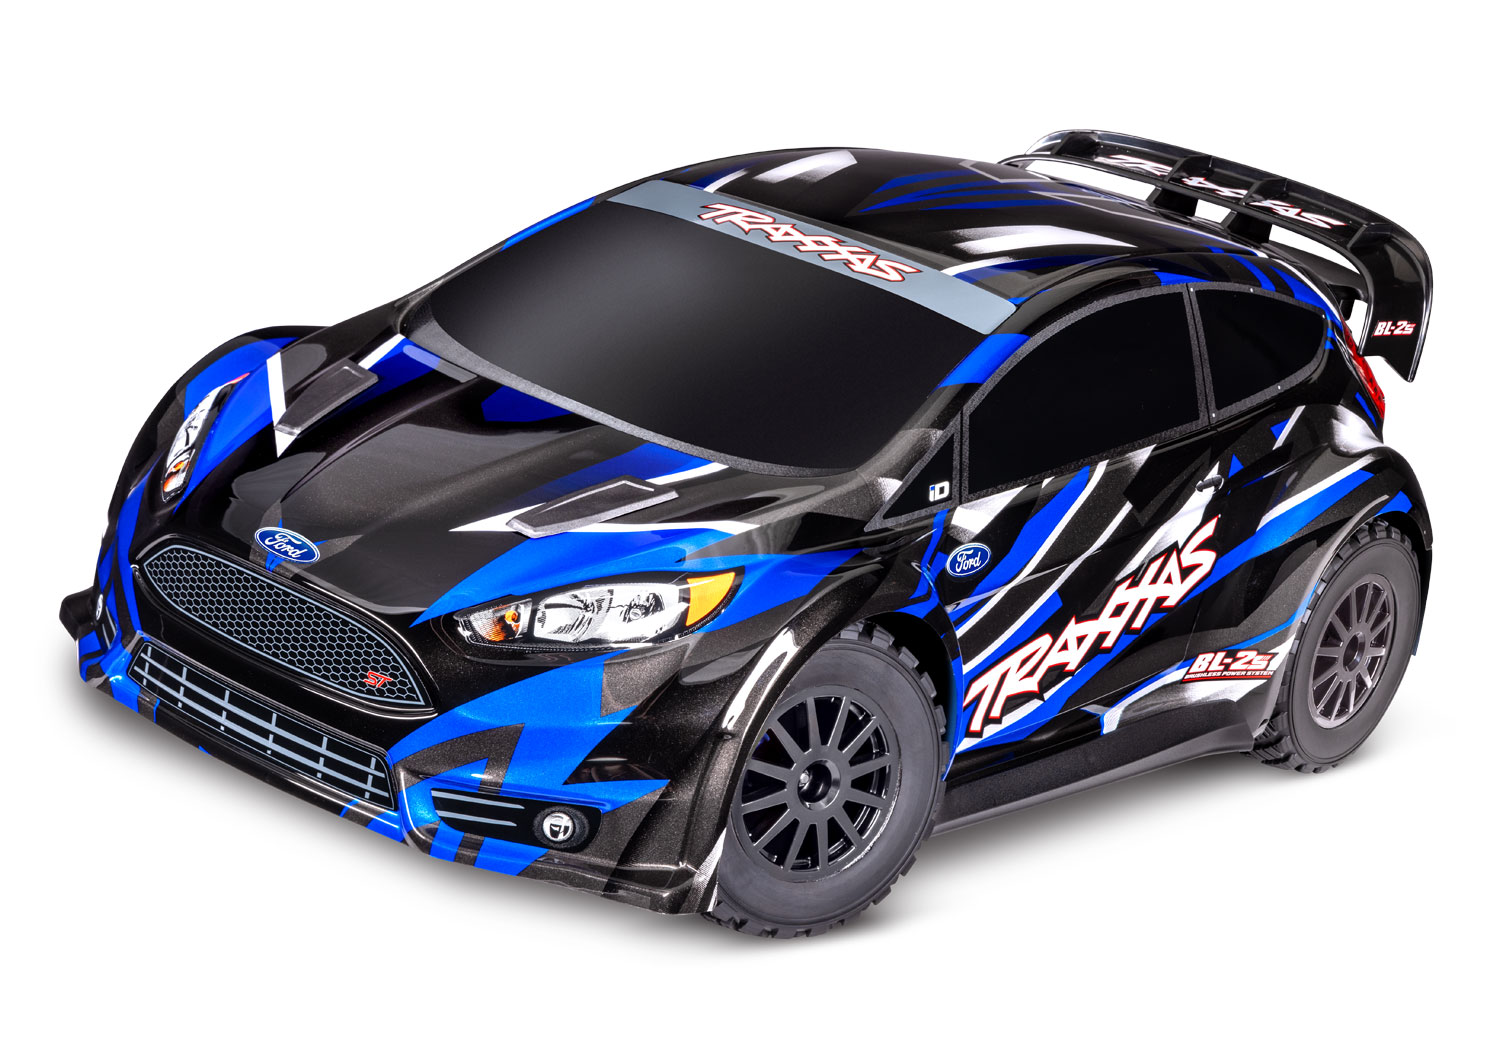 PACK ECO FORD FIESTA ST RALLY BRUSHLESS BL-2S BLEU LIPO 2S 5800 MAH CHARGEUR TRAXXAS SAC OFFERT